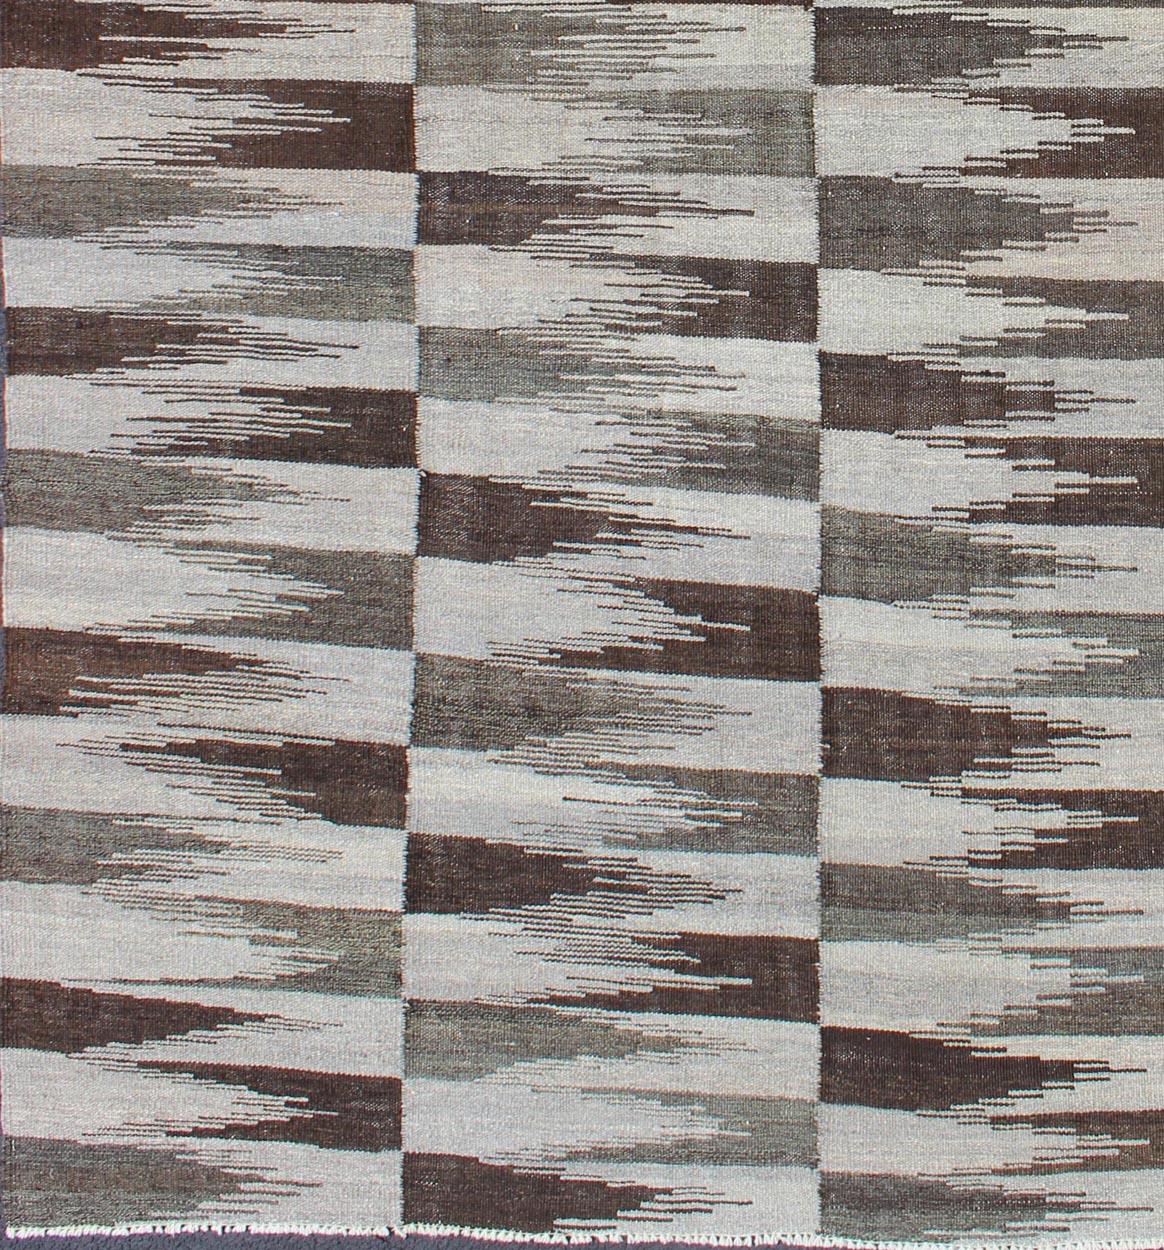  Fine Flat weave Modern Kilim in Neutrals, Browns and Greens Colors, Green and various Brown tone modern design kilim, Keivan Woven Arts/ rug AFG-6317, country of origin / type: Afghanistan / Kilim, condition: new

Measures:5'7 x 8'2 

This newly